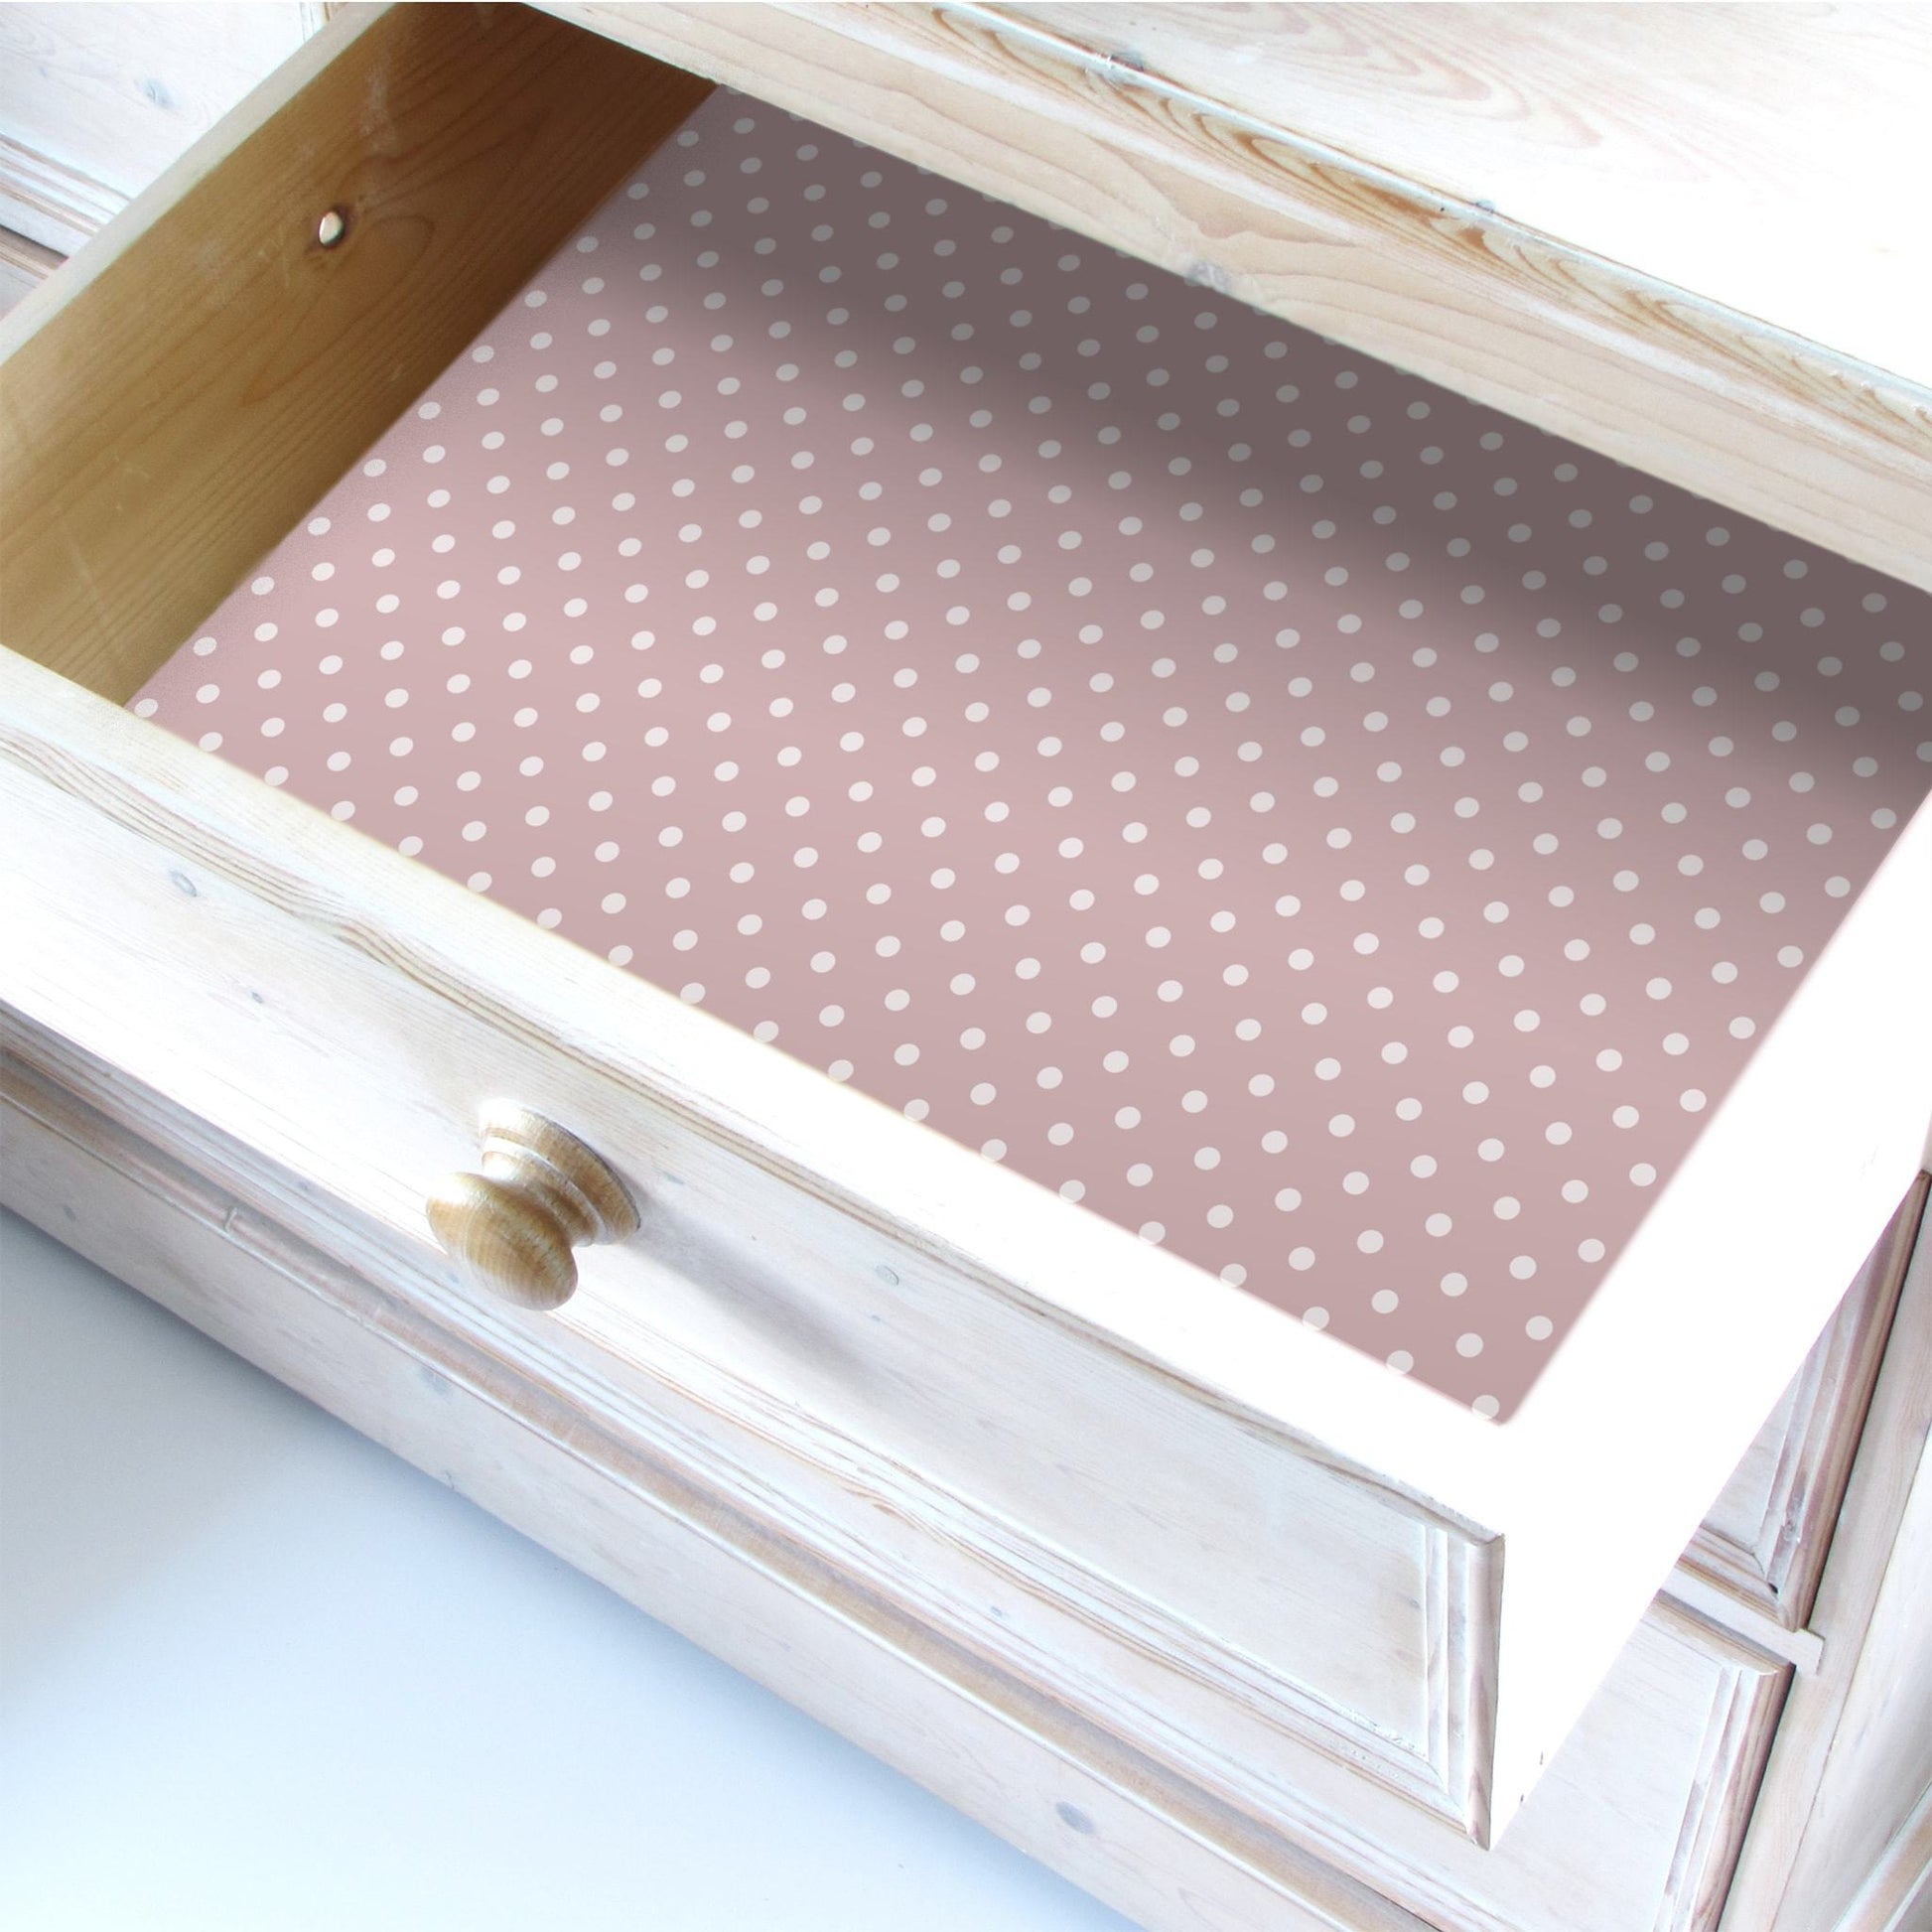 THE MASTER HERBALIST | Wipe Clean & Unscented Drawer Liners in a PINK POLKA DOT Design. Perfect for Kitchen Drawers, Shelves, Cupboards & Cabinets. Made in Suffolk, England. (Pink)